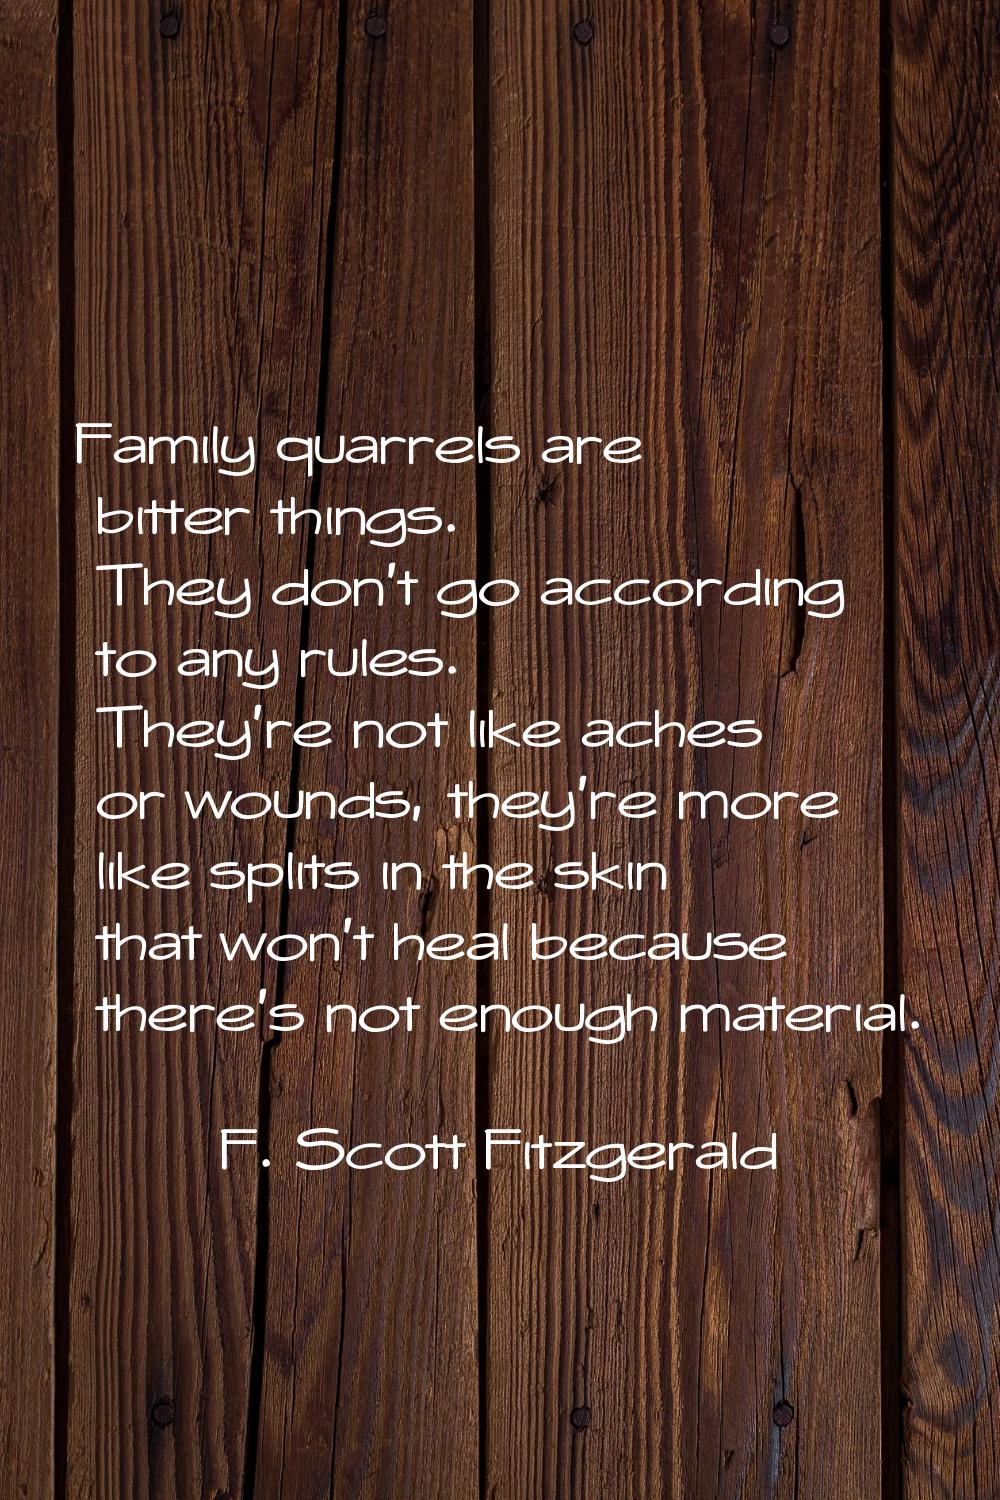 Family quarrels are bitter things. They don't go according to any rules. They're not like aches or 